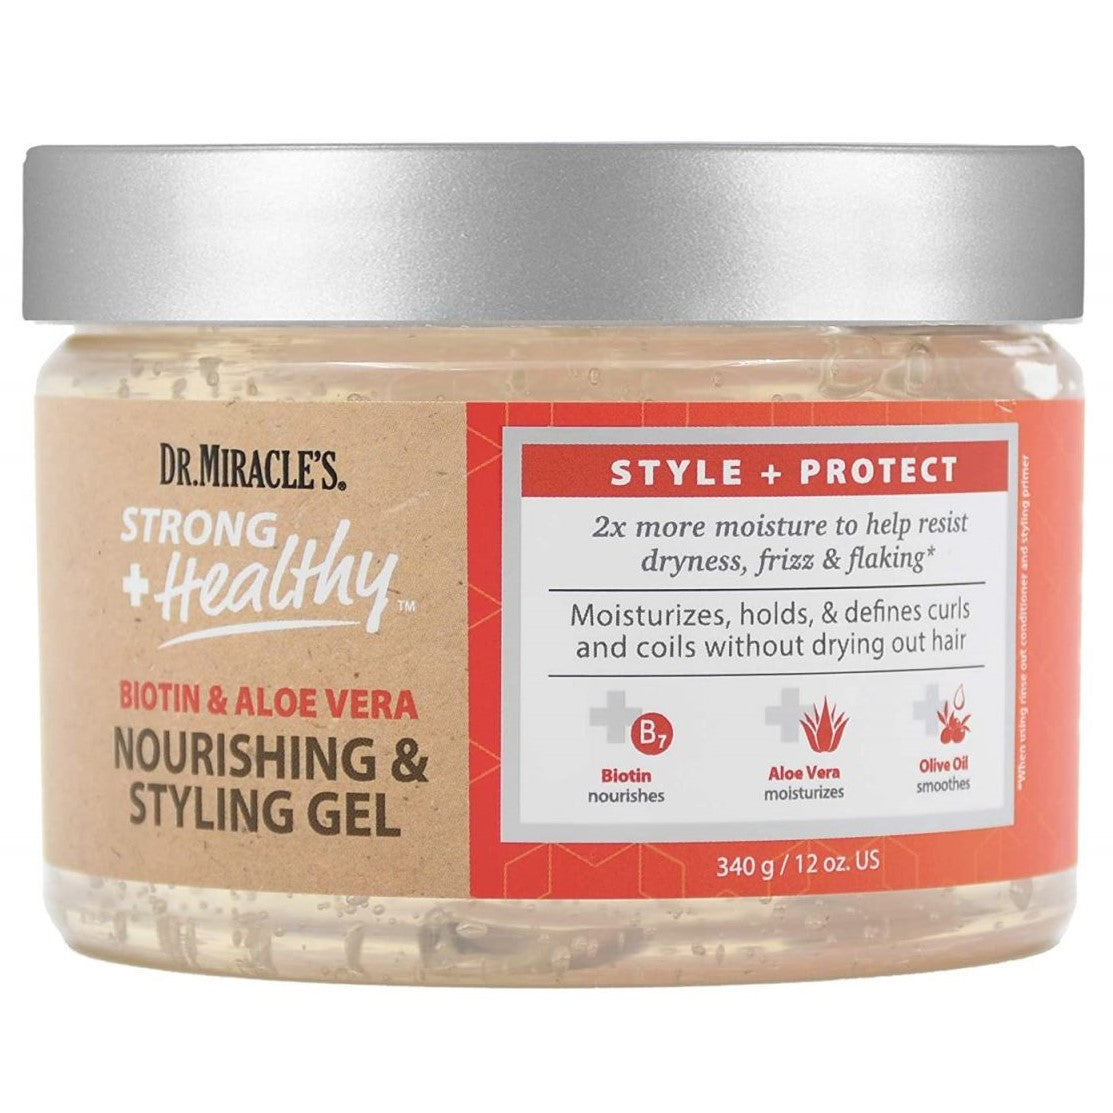 Dr. Miracles Strong + Healthy Nourishing & Styling Gel 340gr/12oz